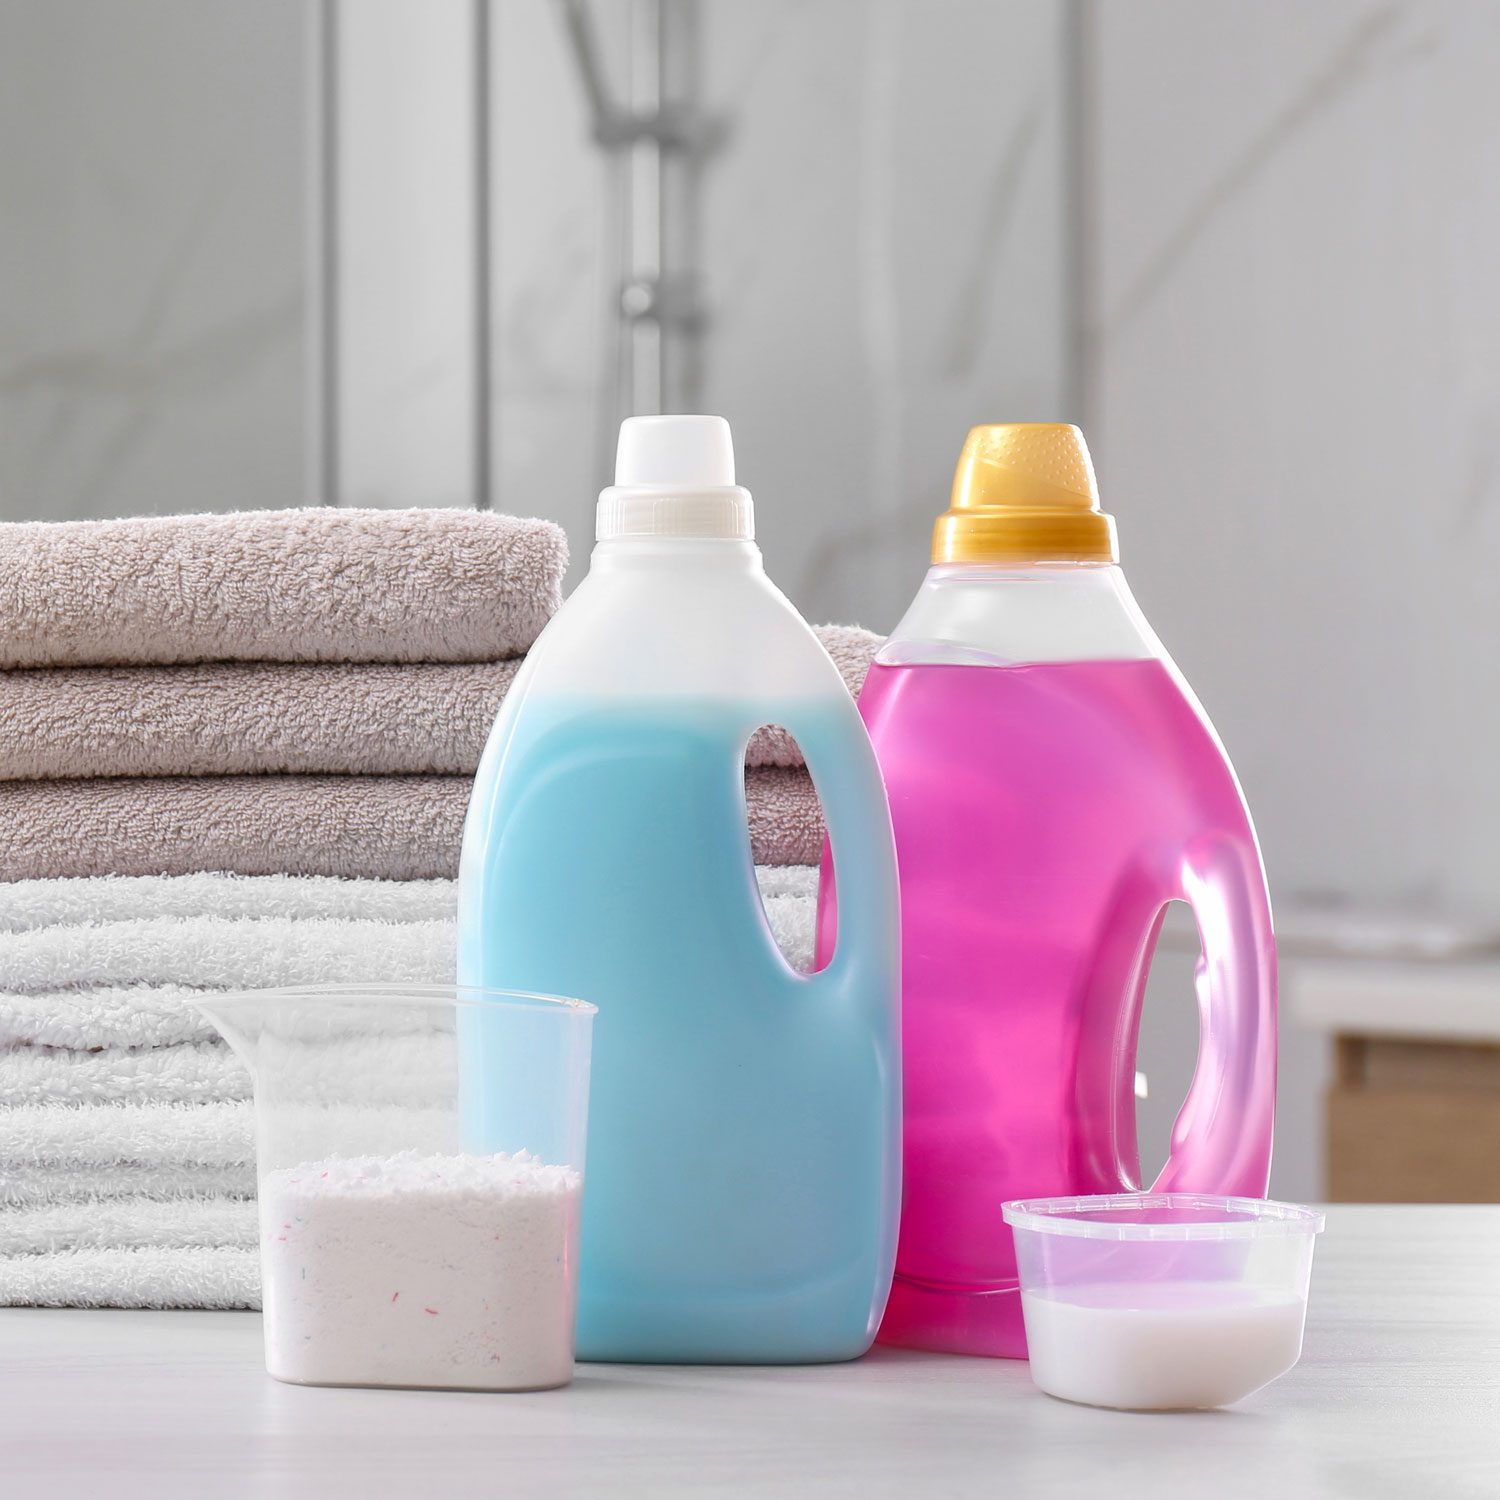 Do You Know What Toxic Materials Are Hiding in Your Laundry Room?